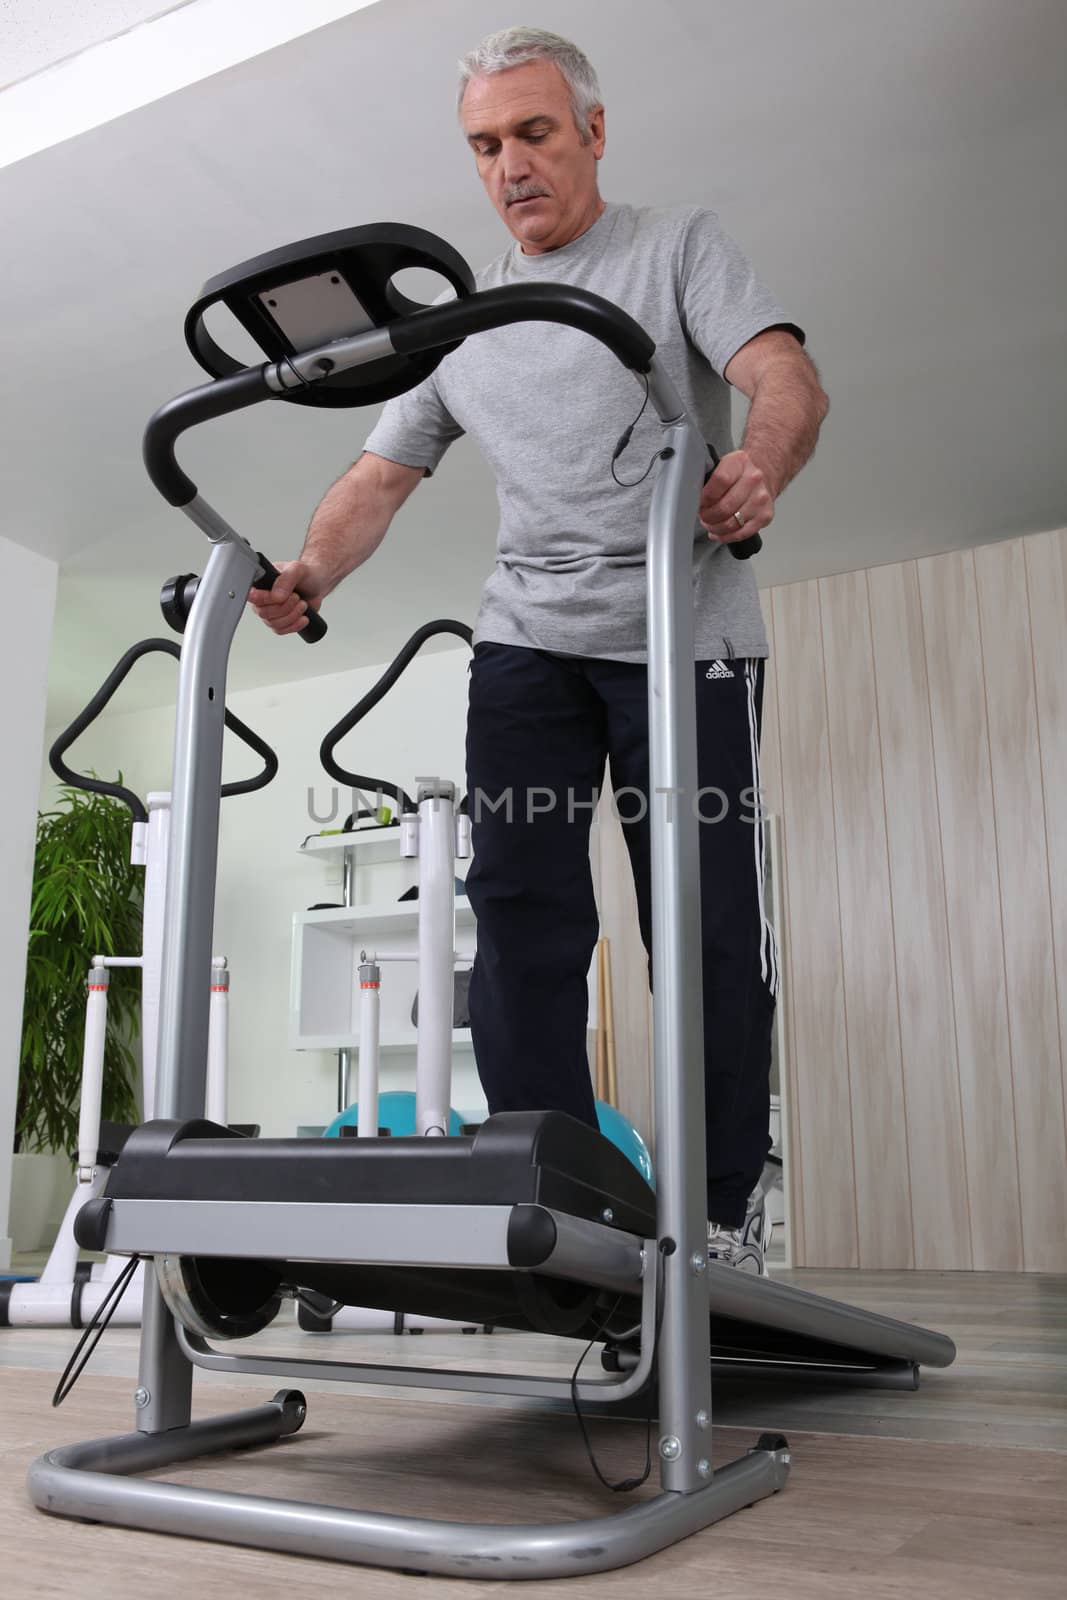 Middle-aged man jogging in gym